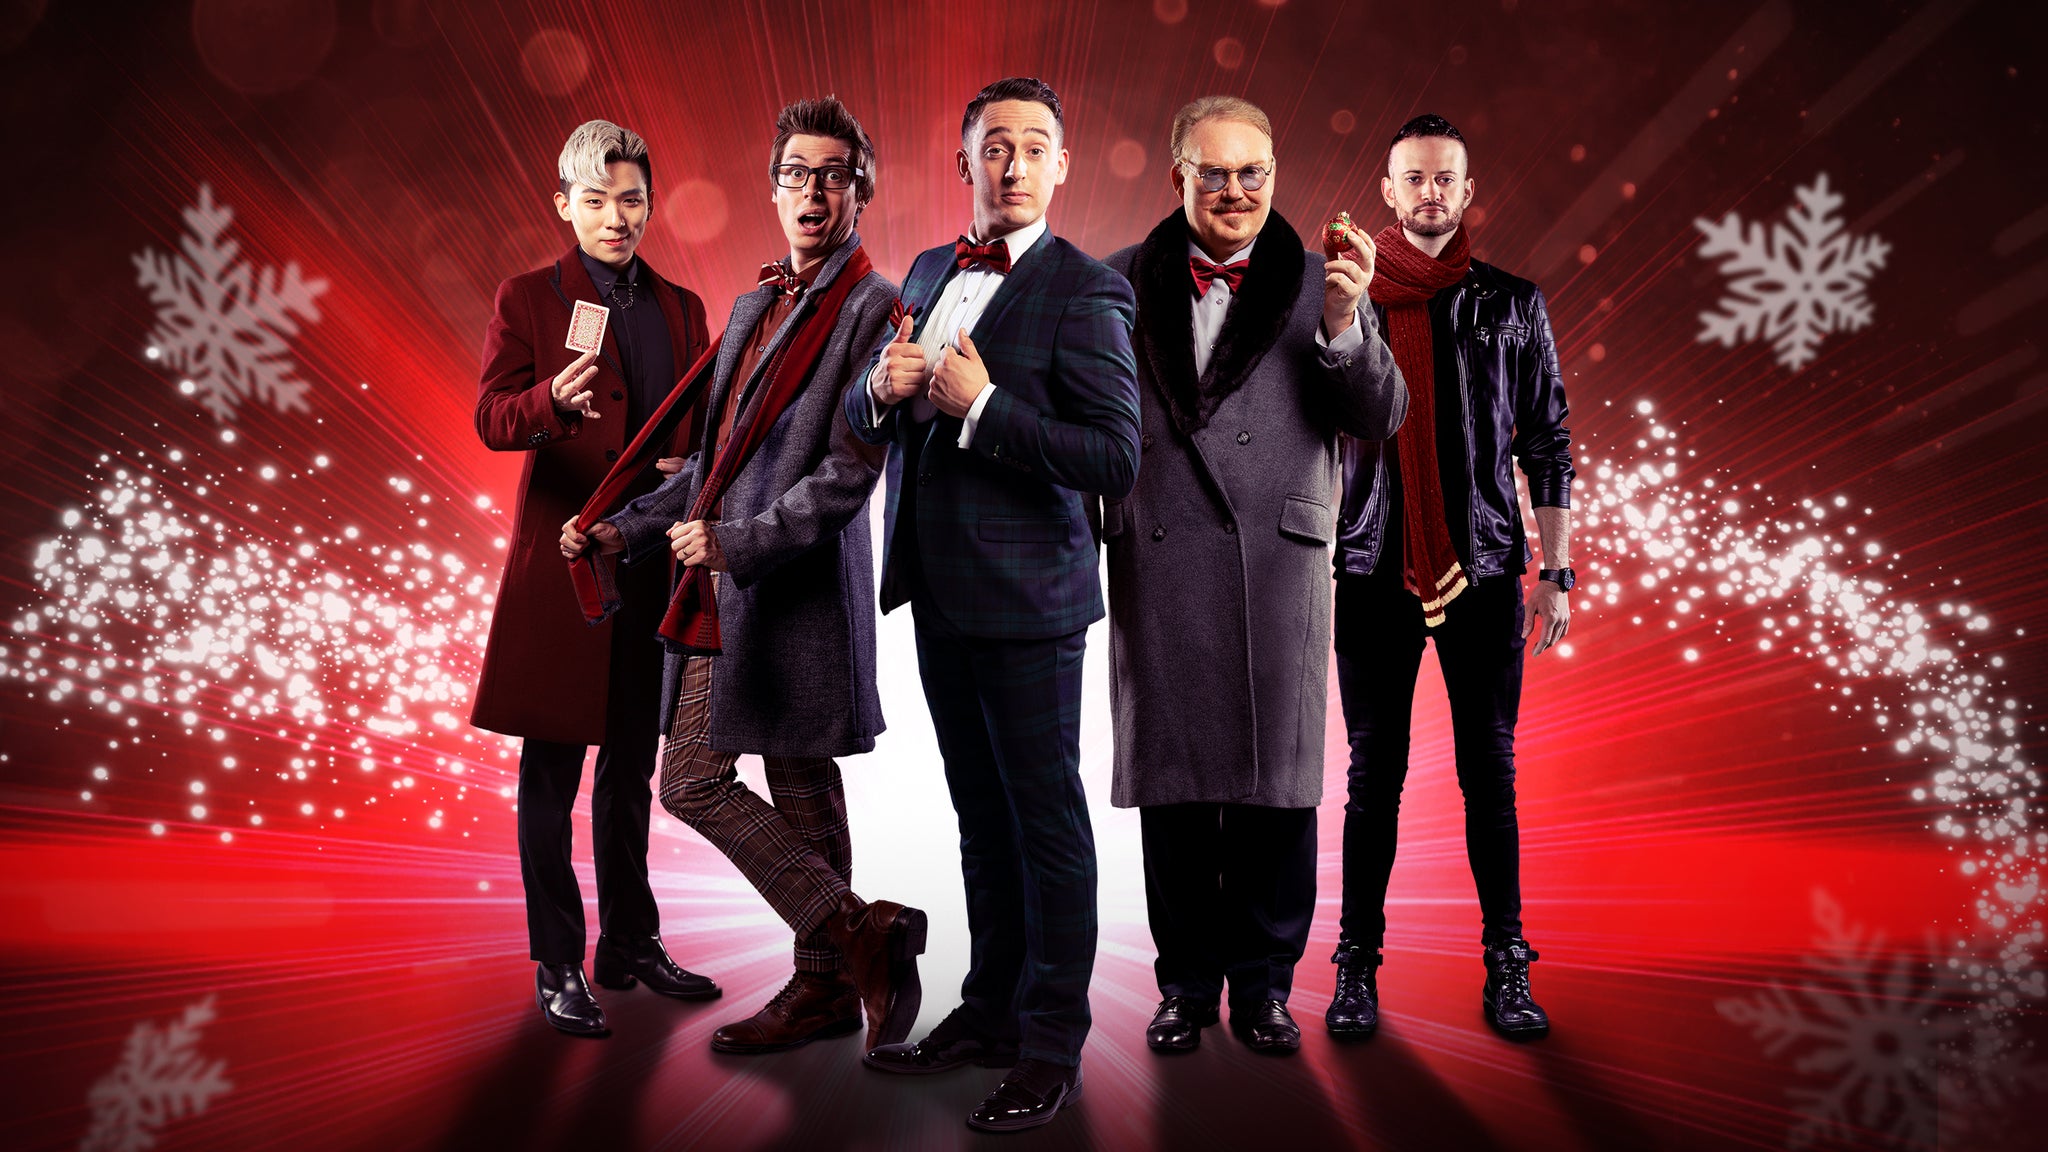 The Illusionists: Magic of the Holidays